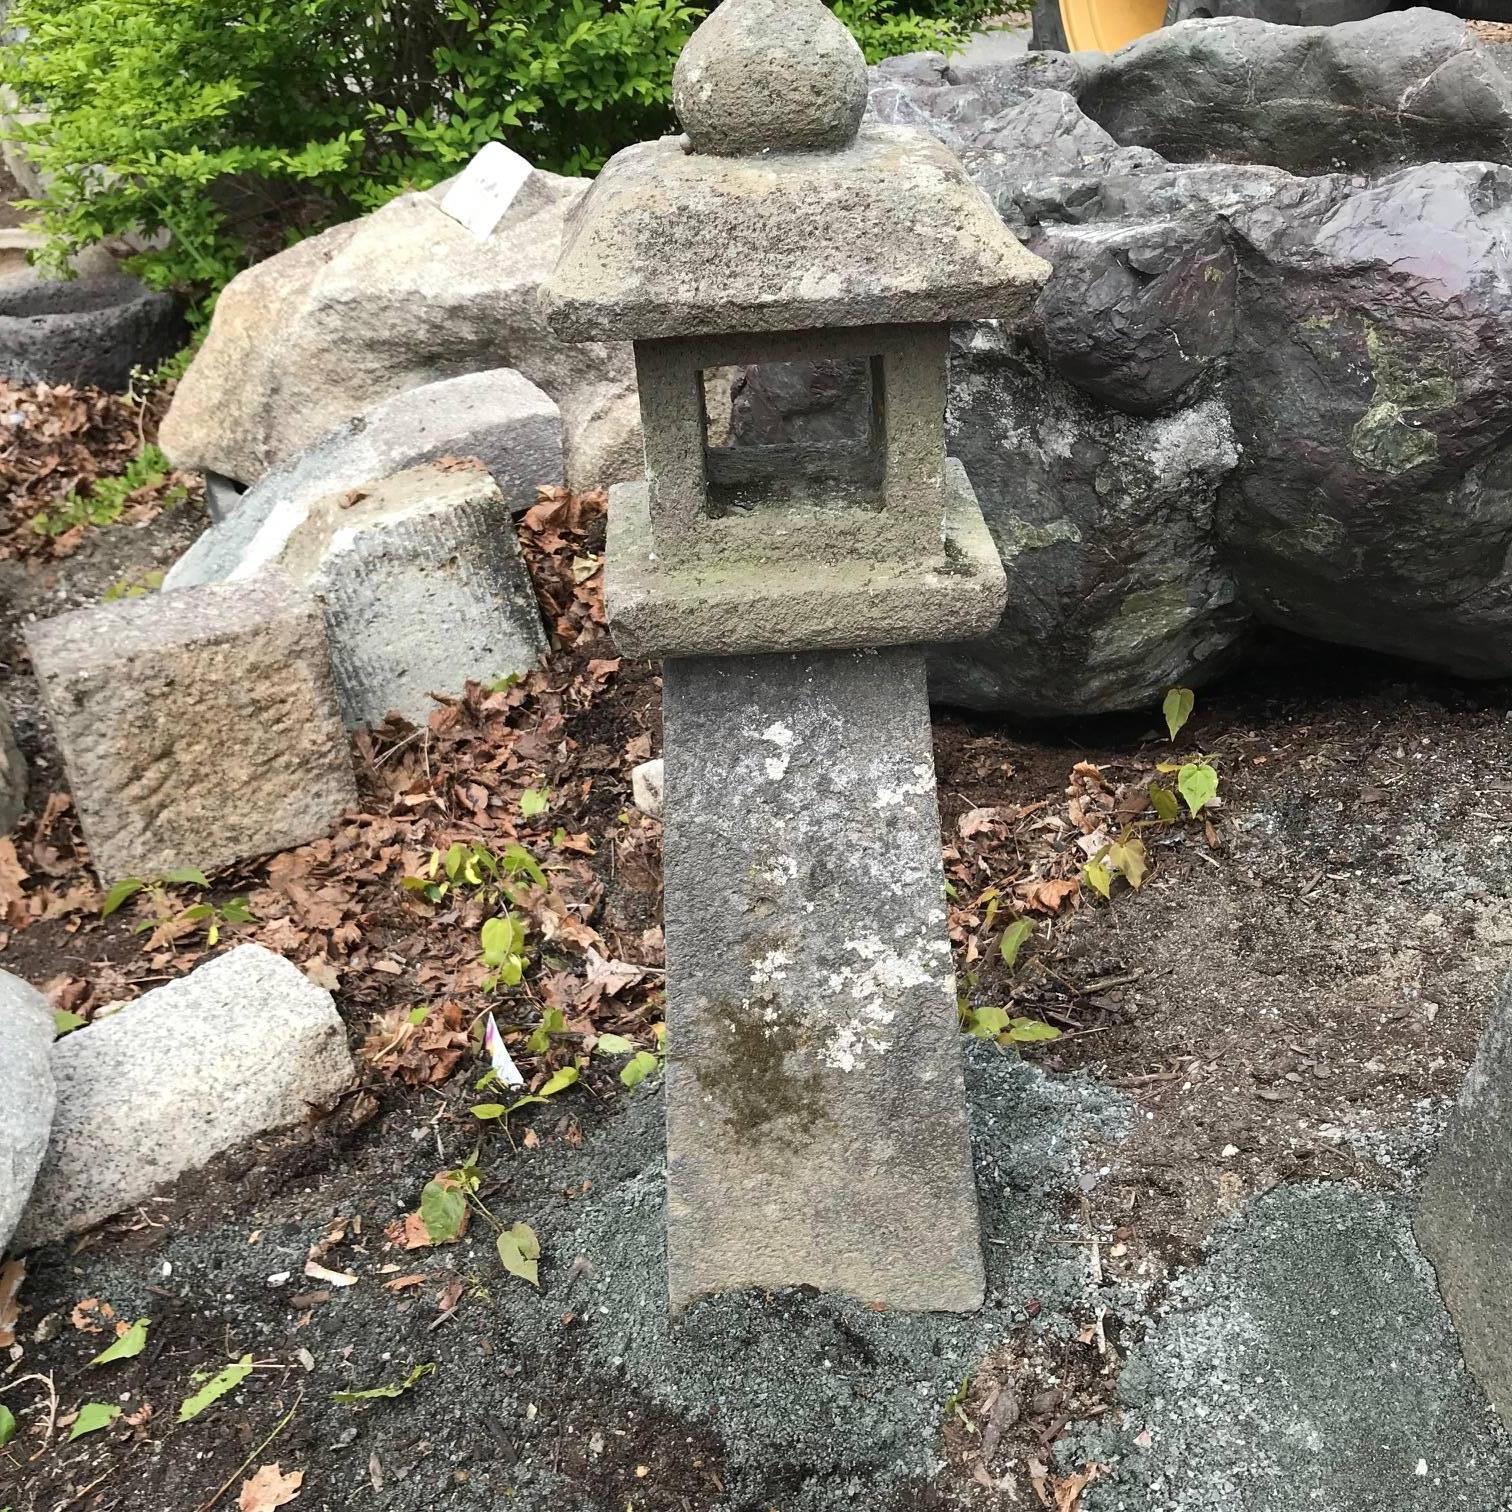 First we've seen. 

A rare petite antique beauty.

Japan, a fine pathway stone lantern with beautifully lichen and patina from great age

Fine original condition.

Dimensions: 31 inches tall and 8.5 inches diameter, two pieces 

Period: Edo to Meiji